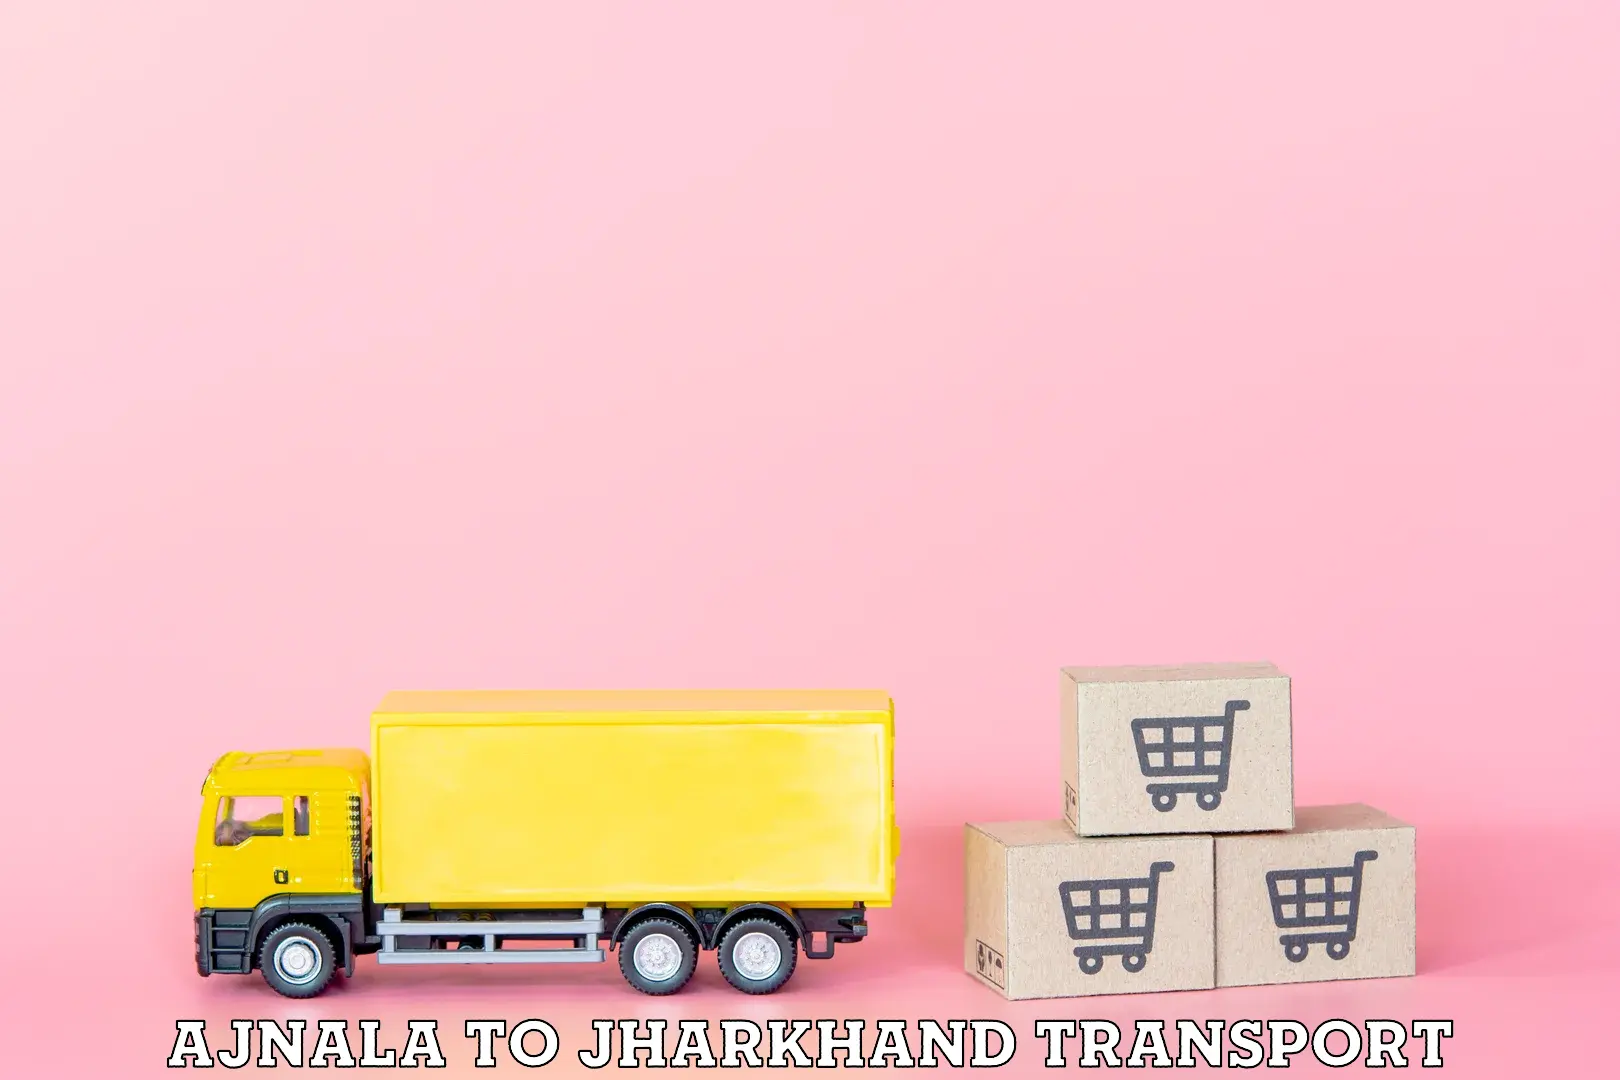 Truck transport companies in India Ajnala to Hazaribagh